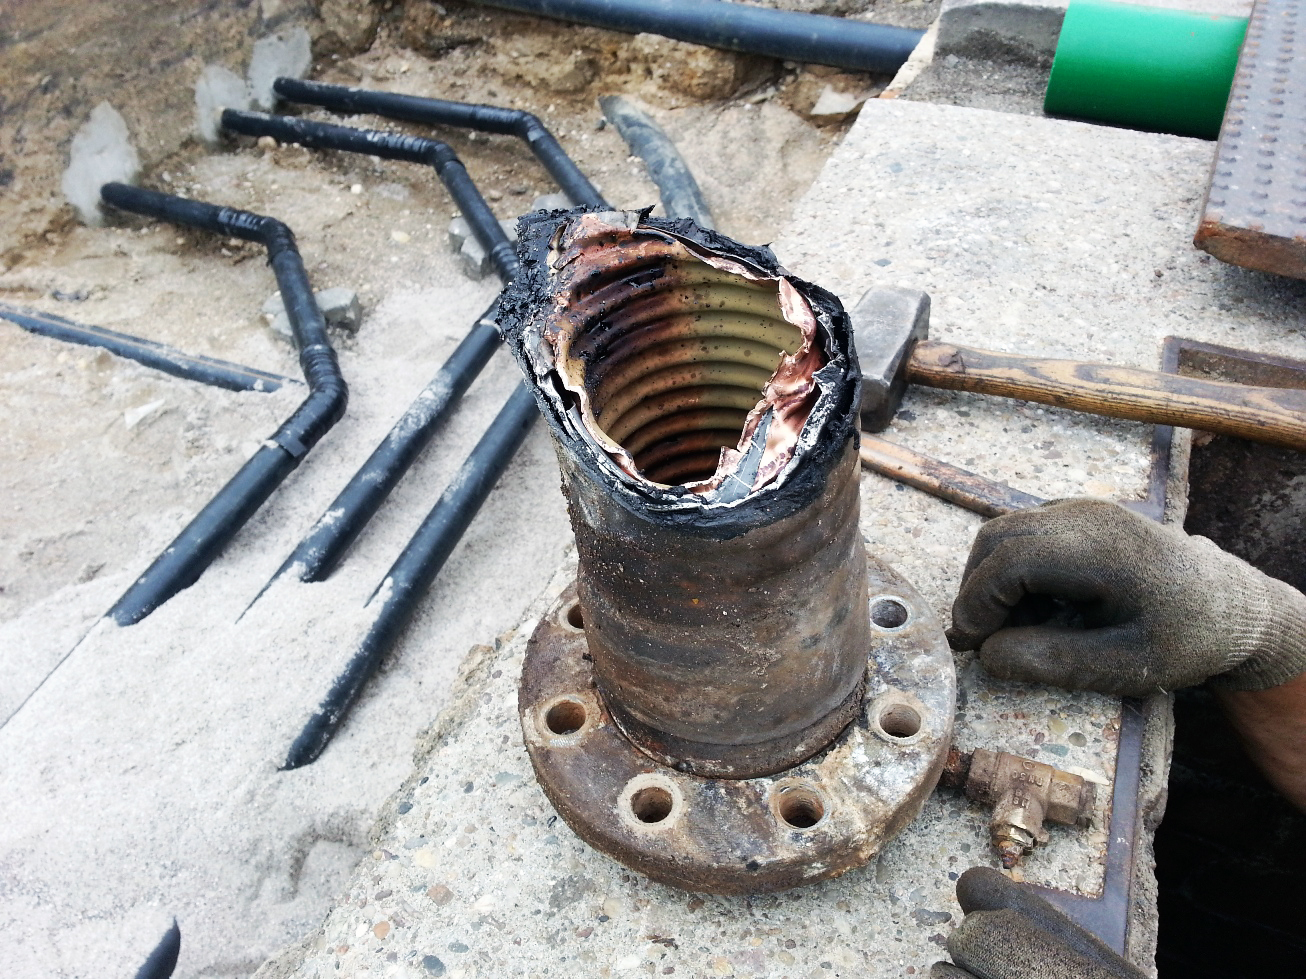 Previously installed corrugated steel and copper piping was damaged due to corrosion